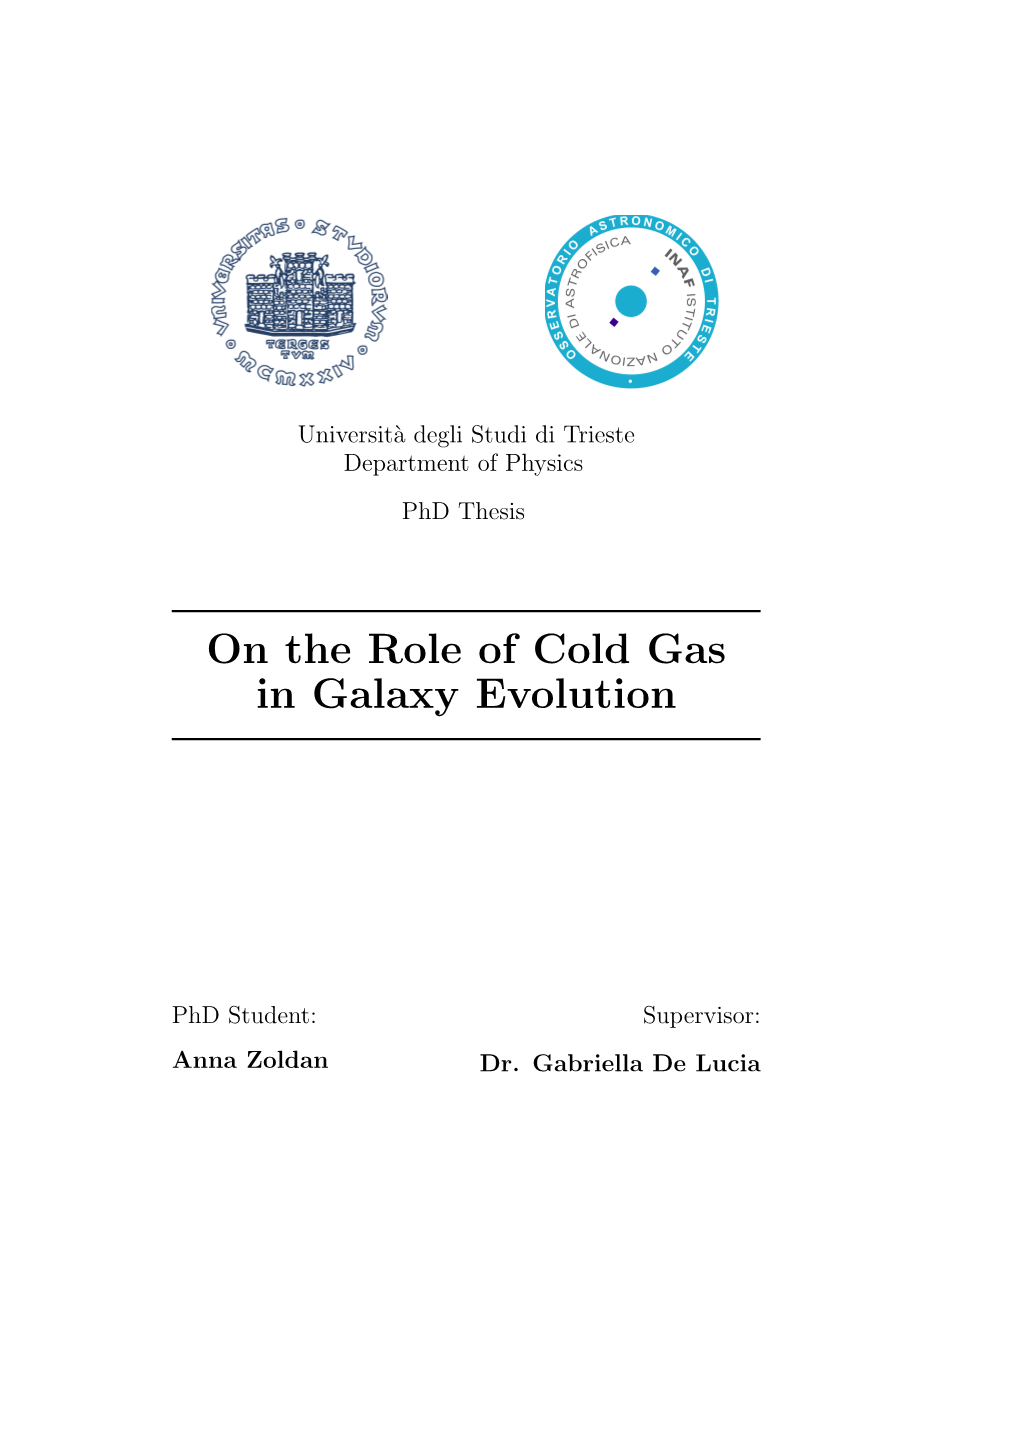 On the Role of Cold Gas in Galaxy Evolution